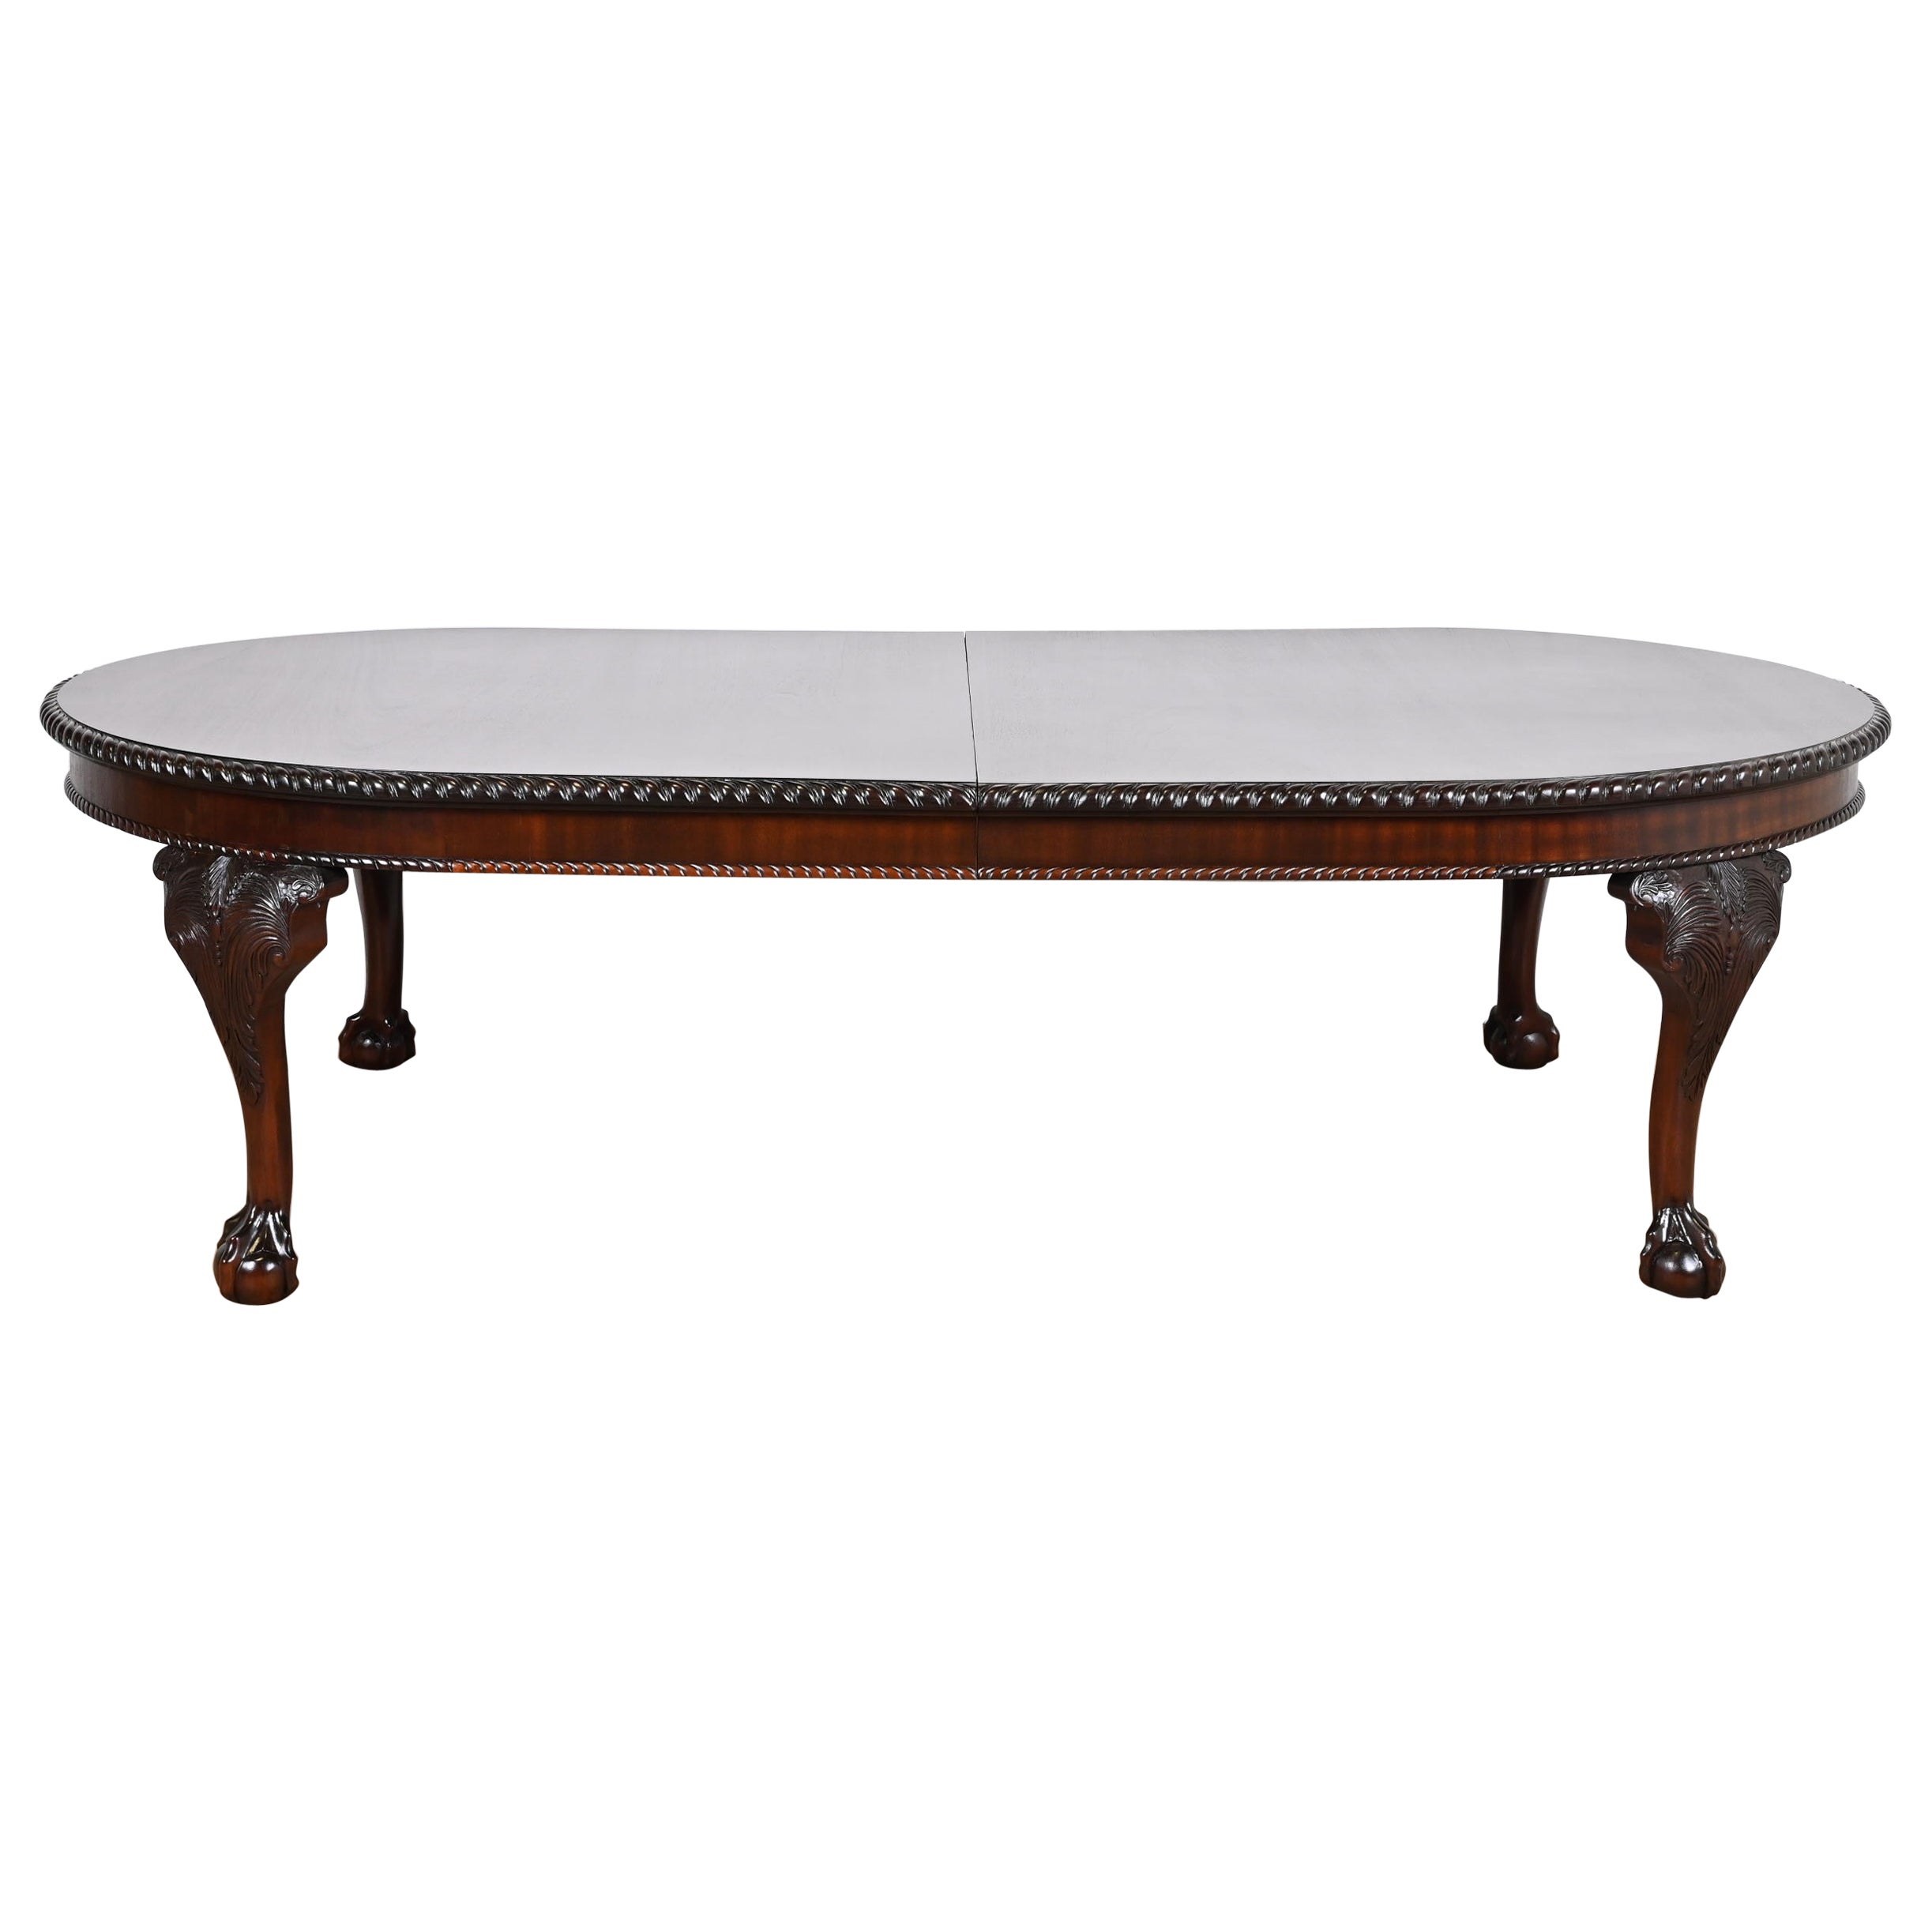 Maitland Smith Monumental Chippendale Carved Mahogany Dining Table, Refinished